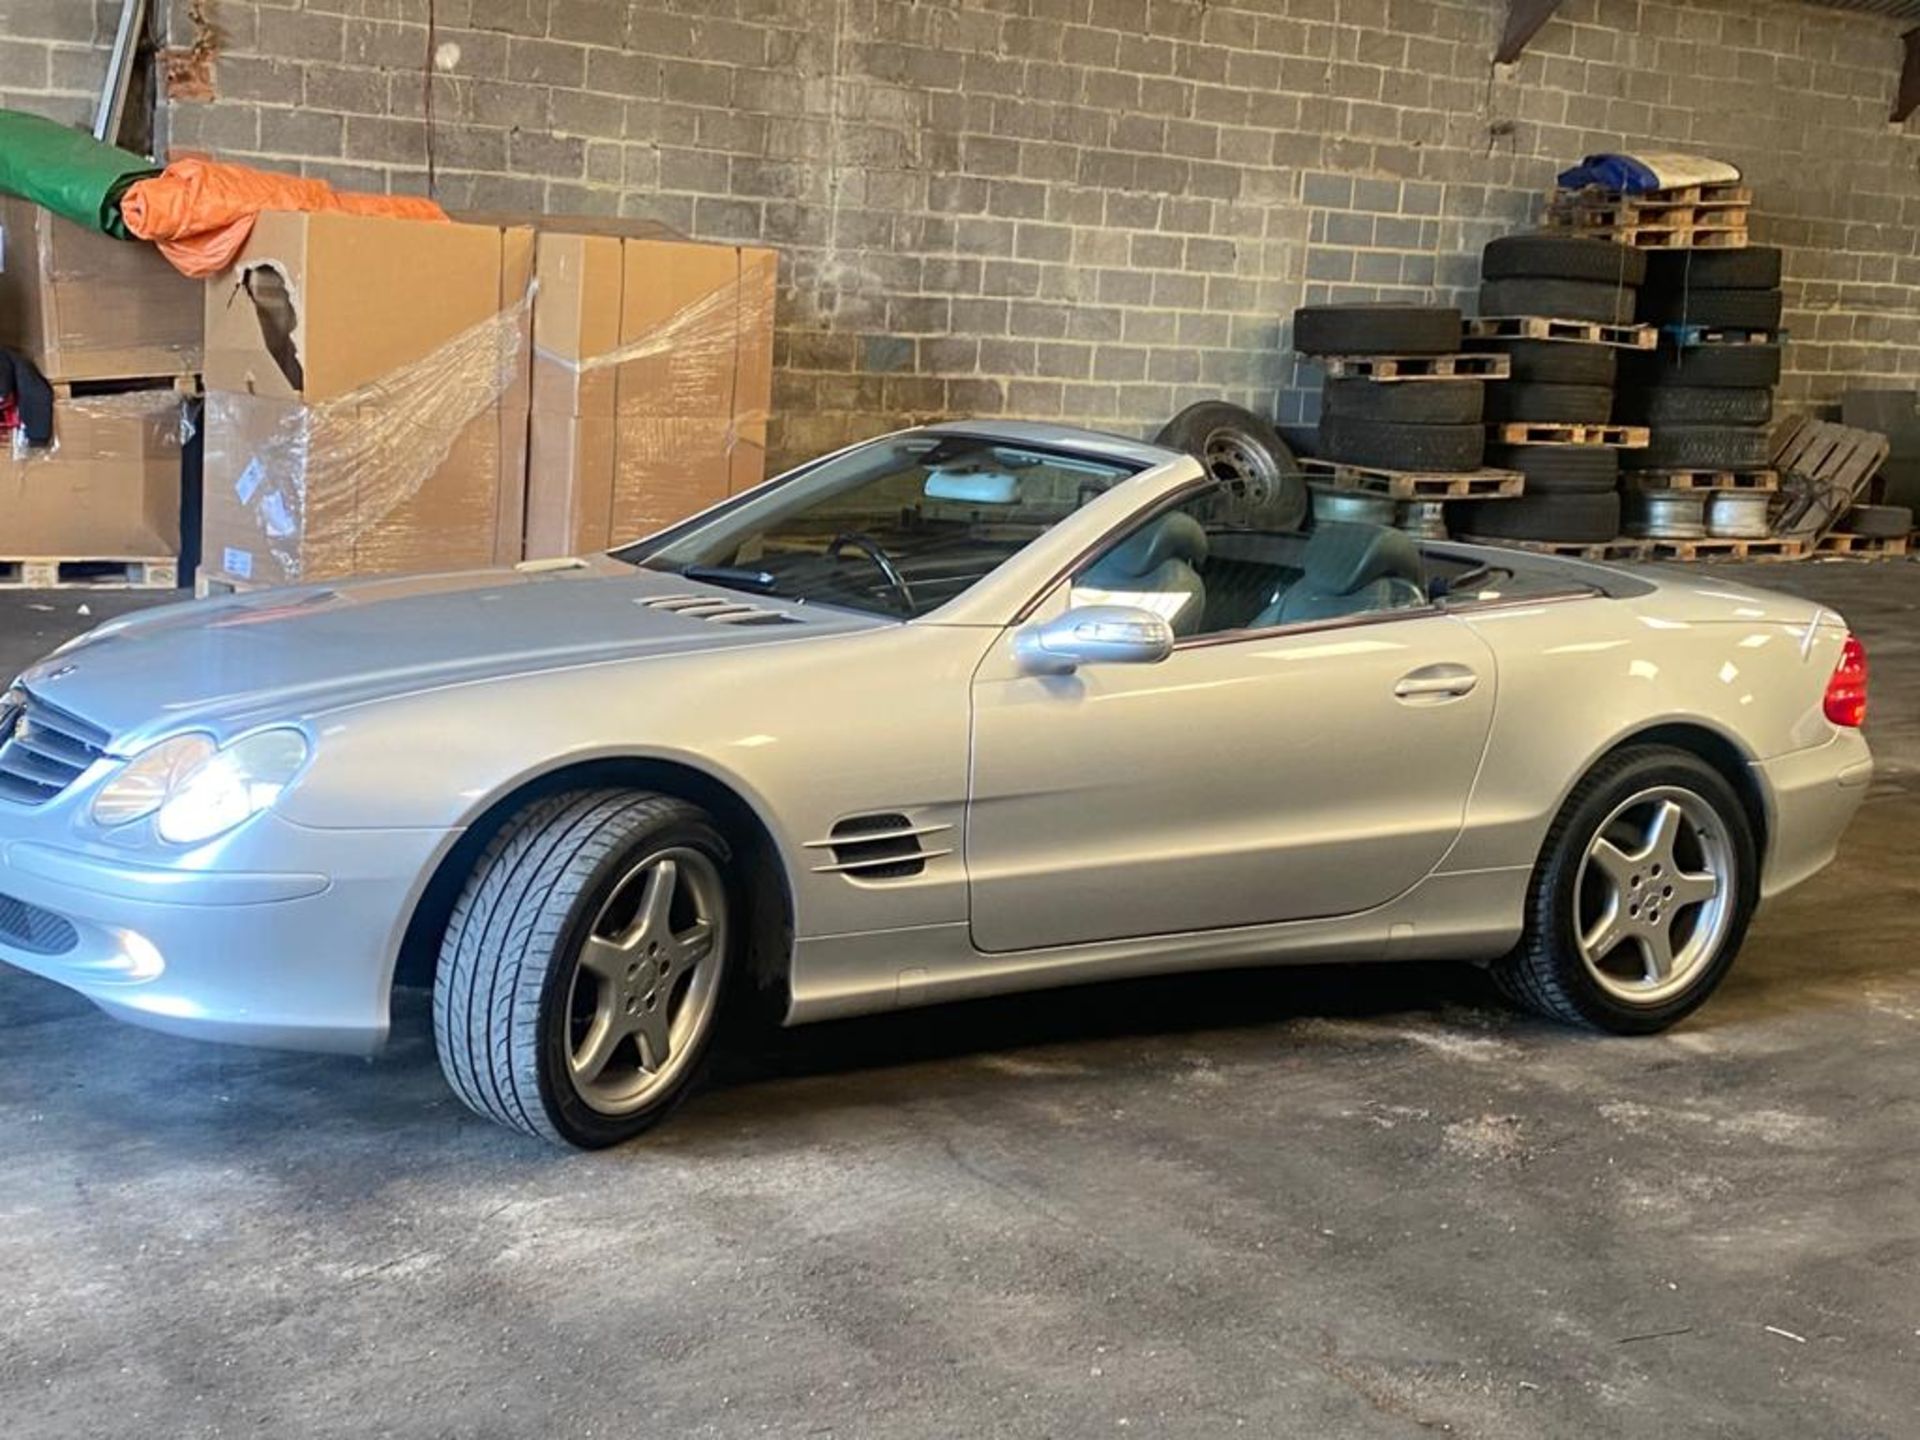 MERCEDES CONVERTIBLE 350 SL 2006 - Image 2 of 16